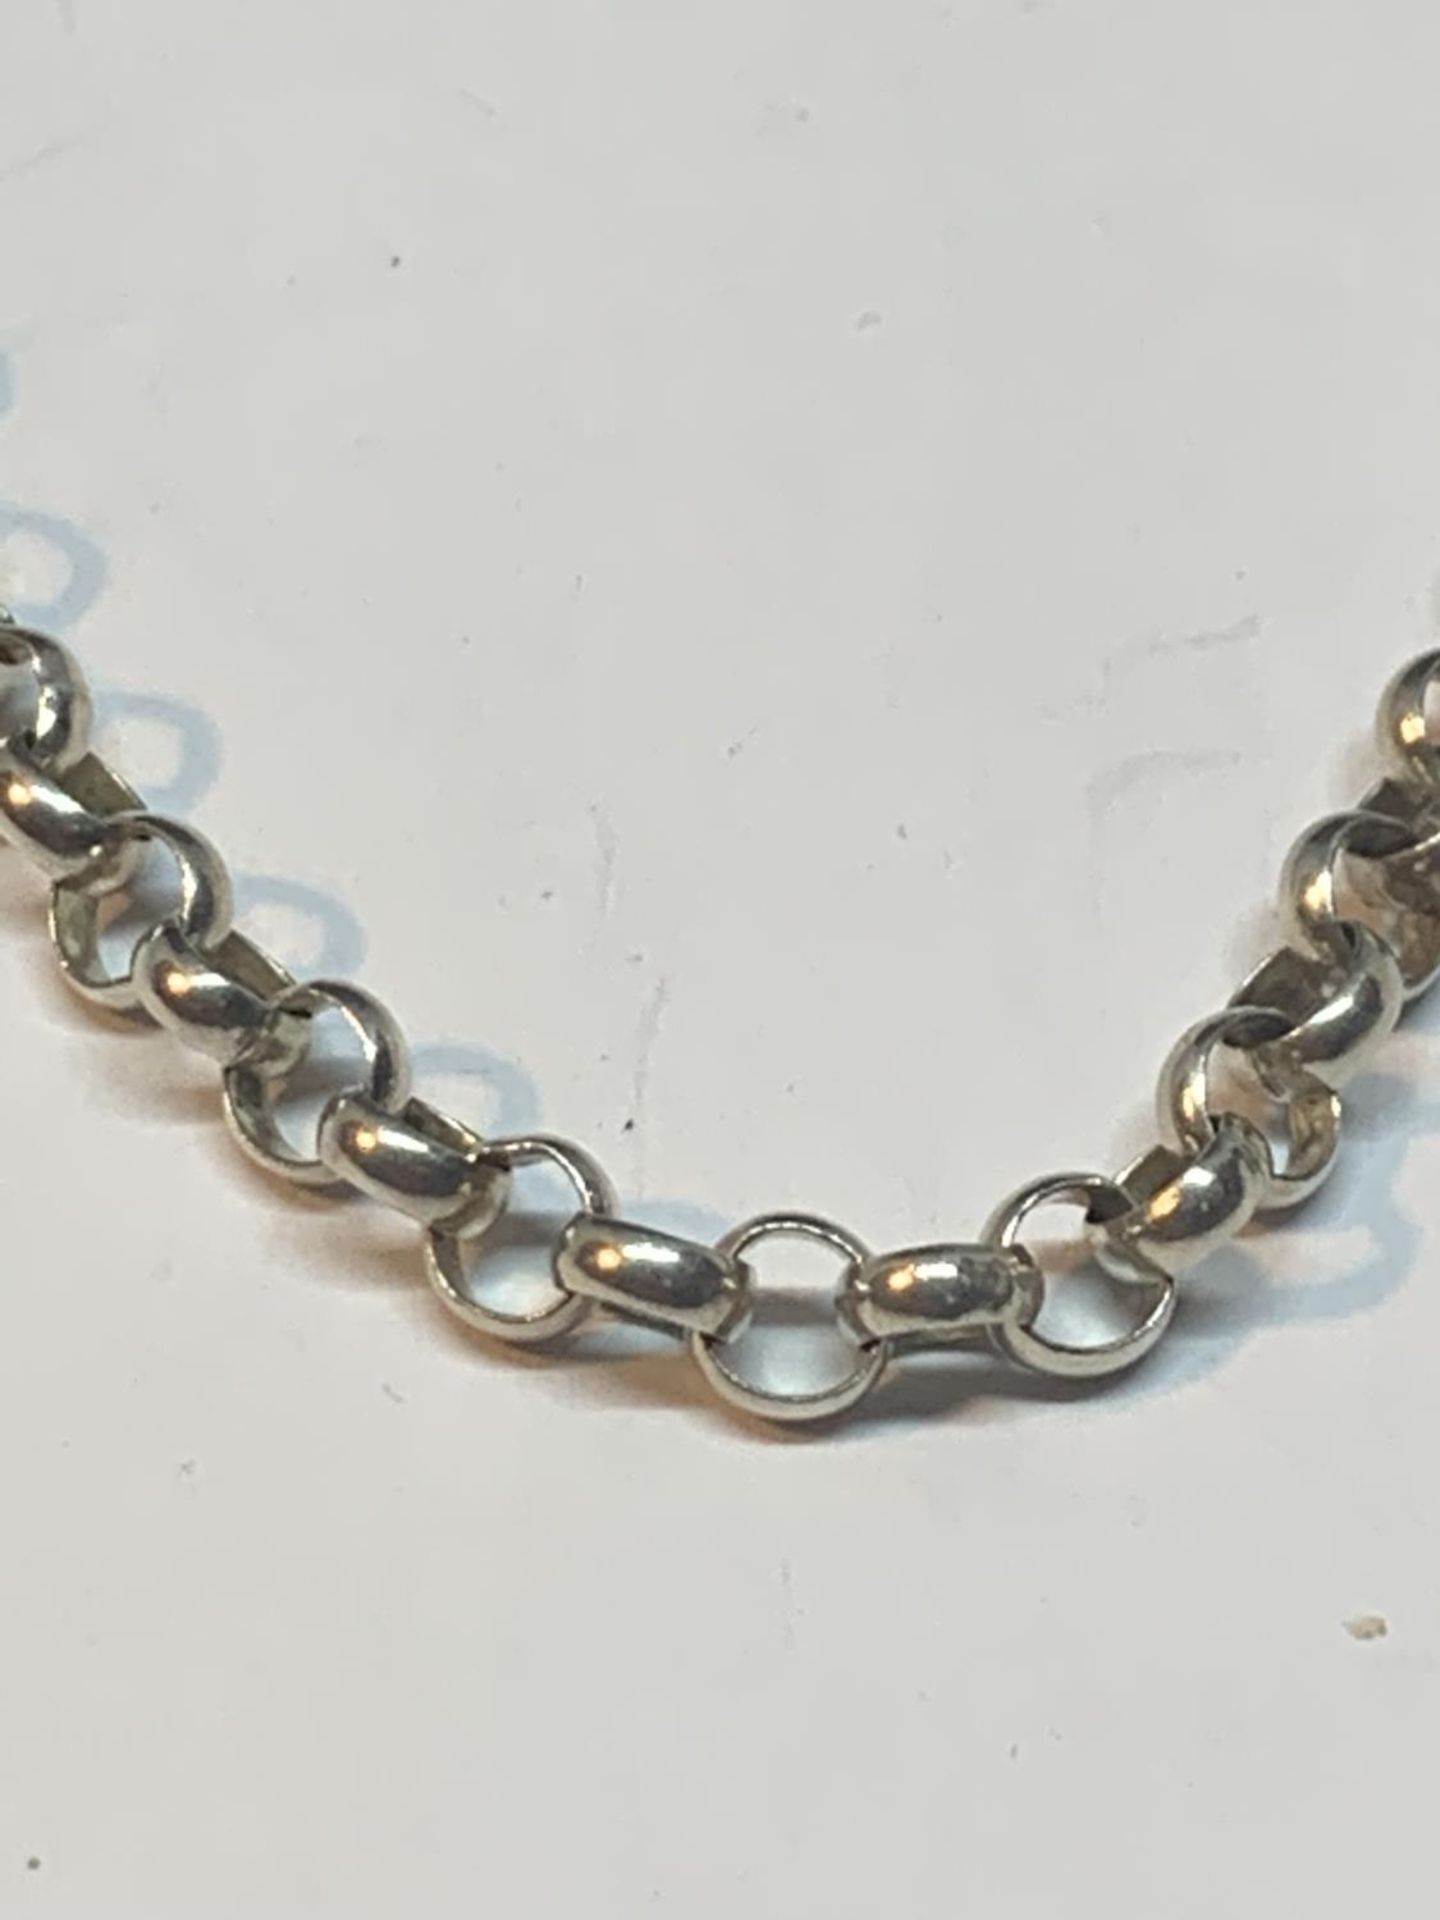 A HEAVY SILVER BELCHER CHAIN NECKLACE 23 INCHES LONG - Image 2 of 3